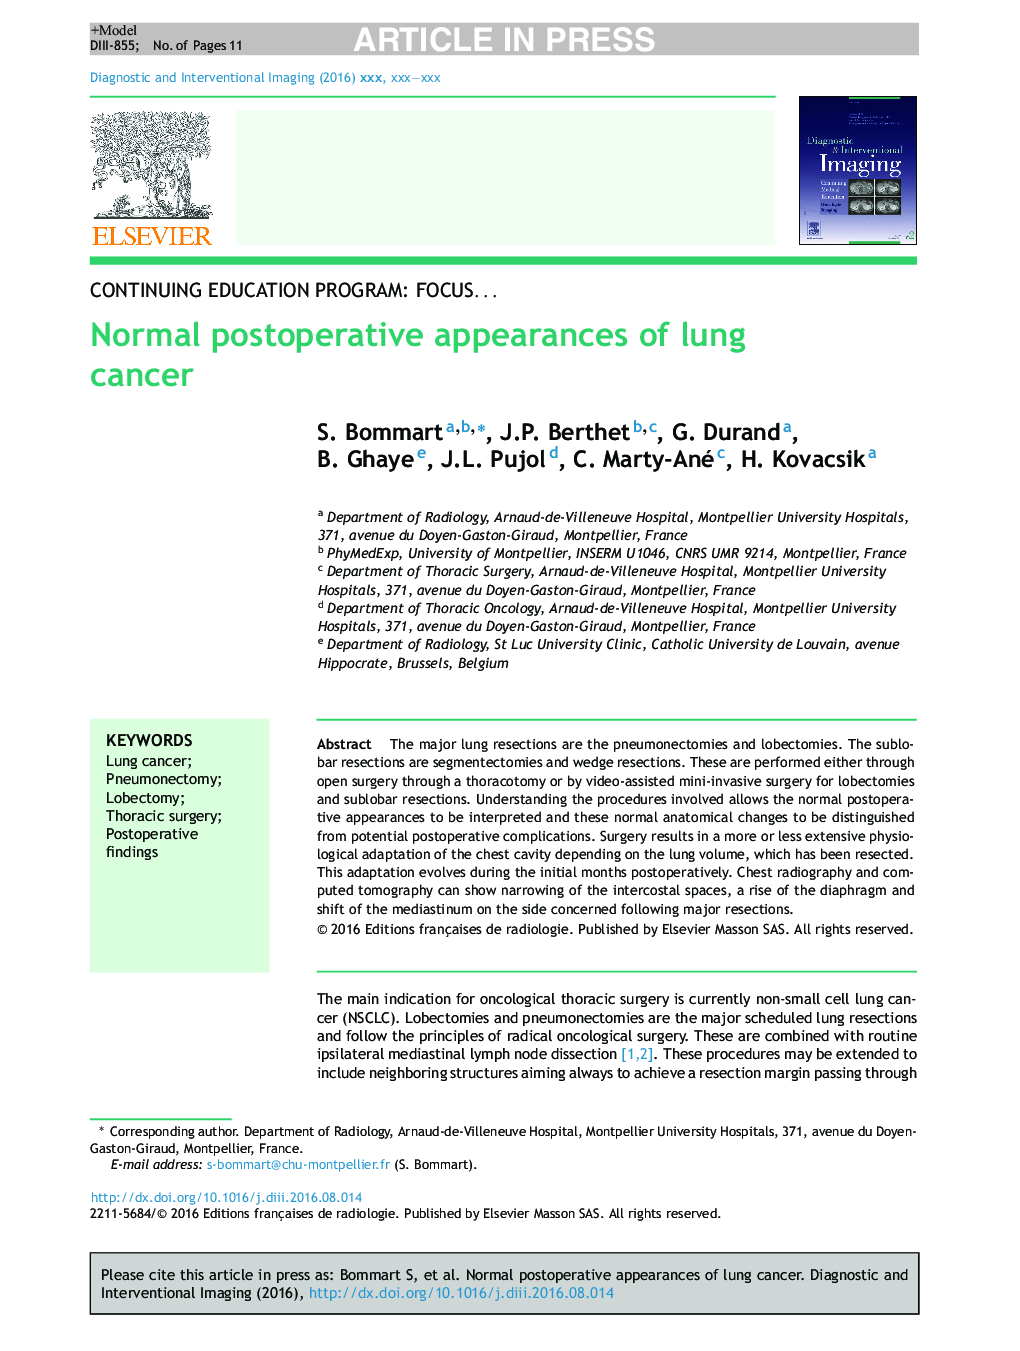 Normal postoperative appearances of lung cancer